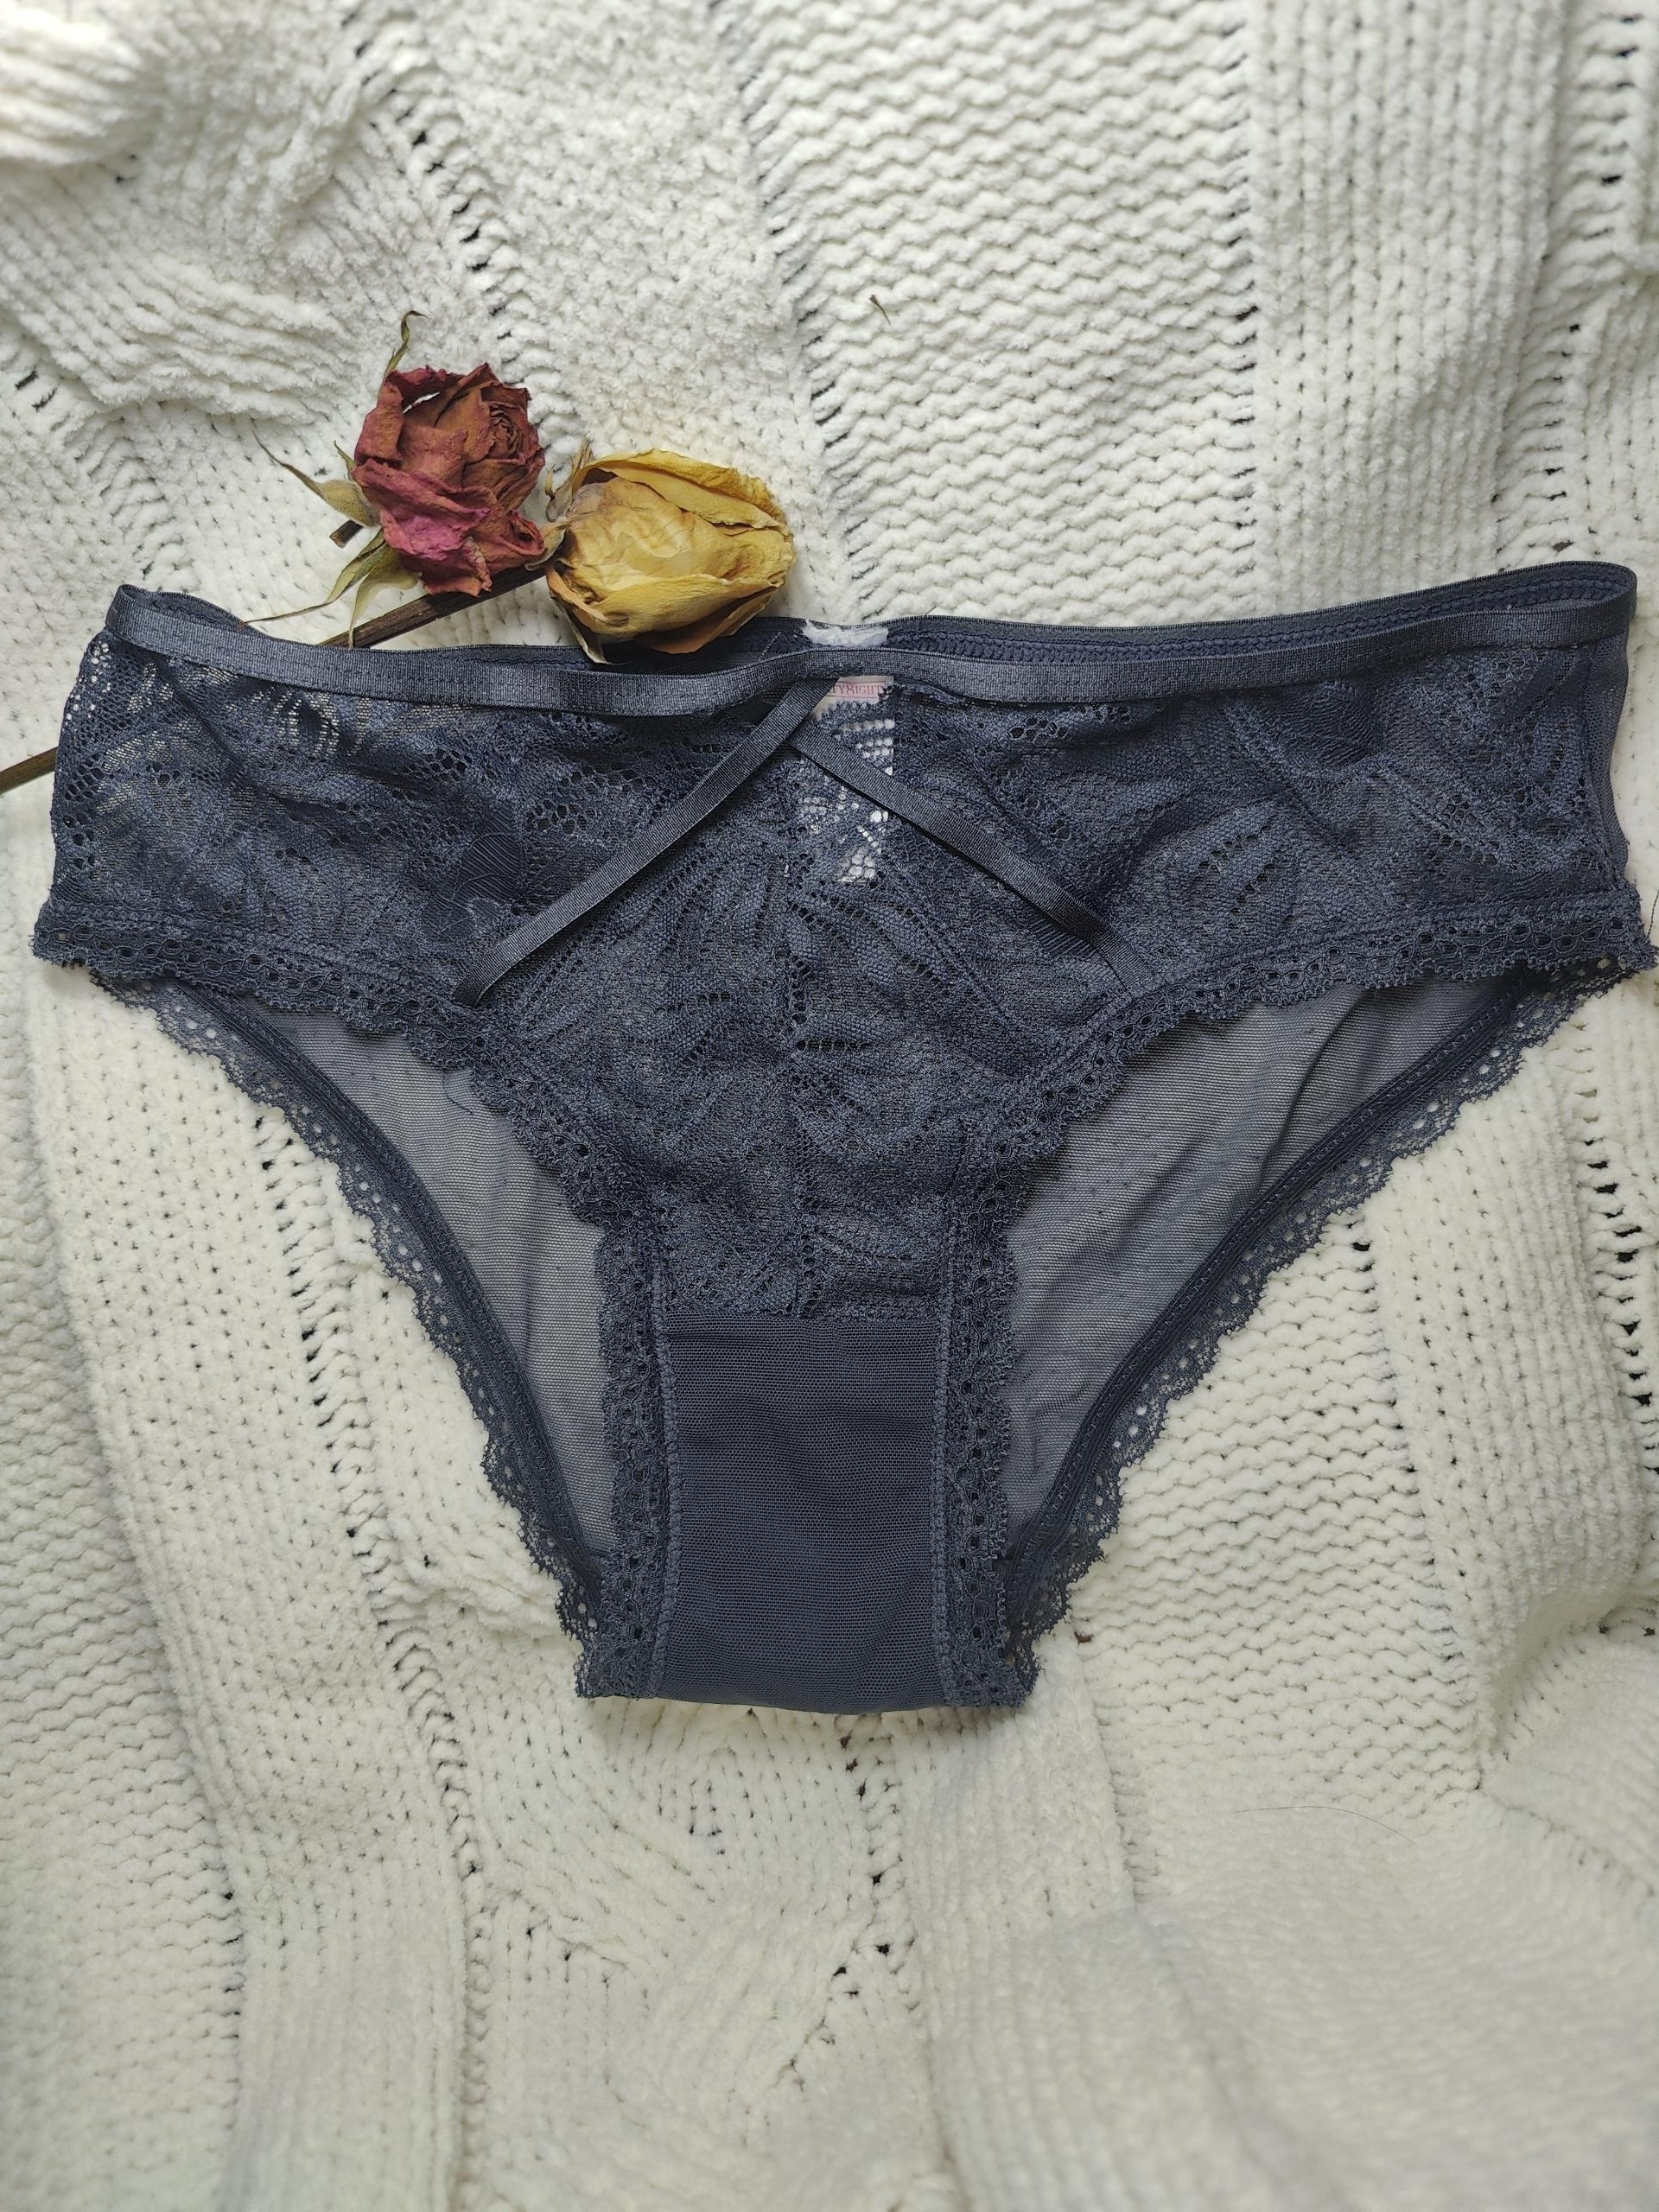 Linen Purity Womens Lace Trim Panties Underwear Floral Lace Sexy